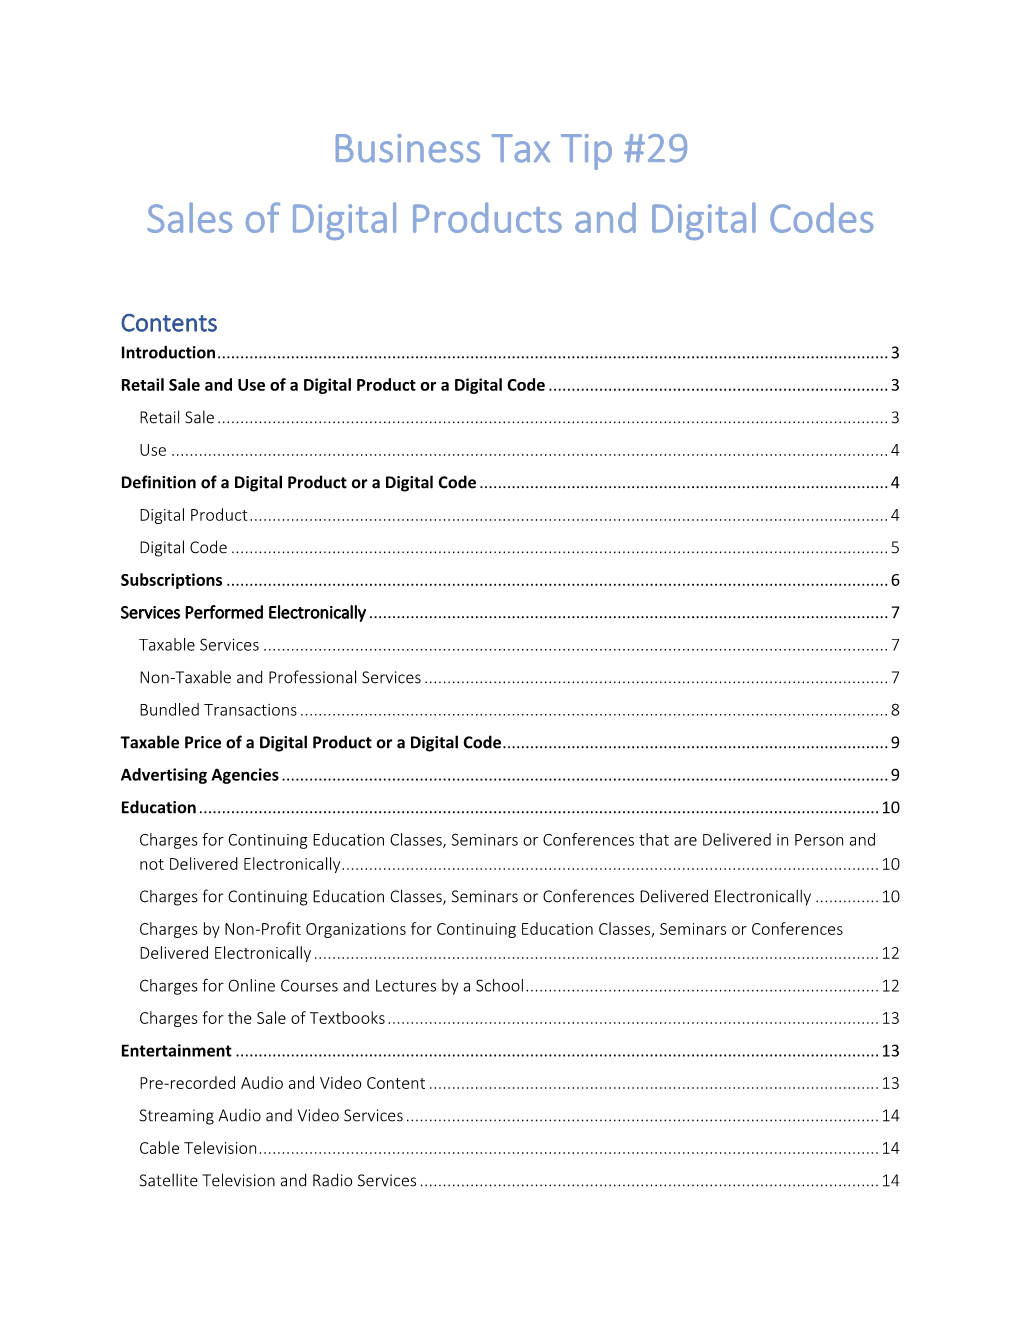 Business Tax Tip #29 Sales of Digital Products and Digital Codes